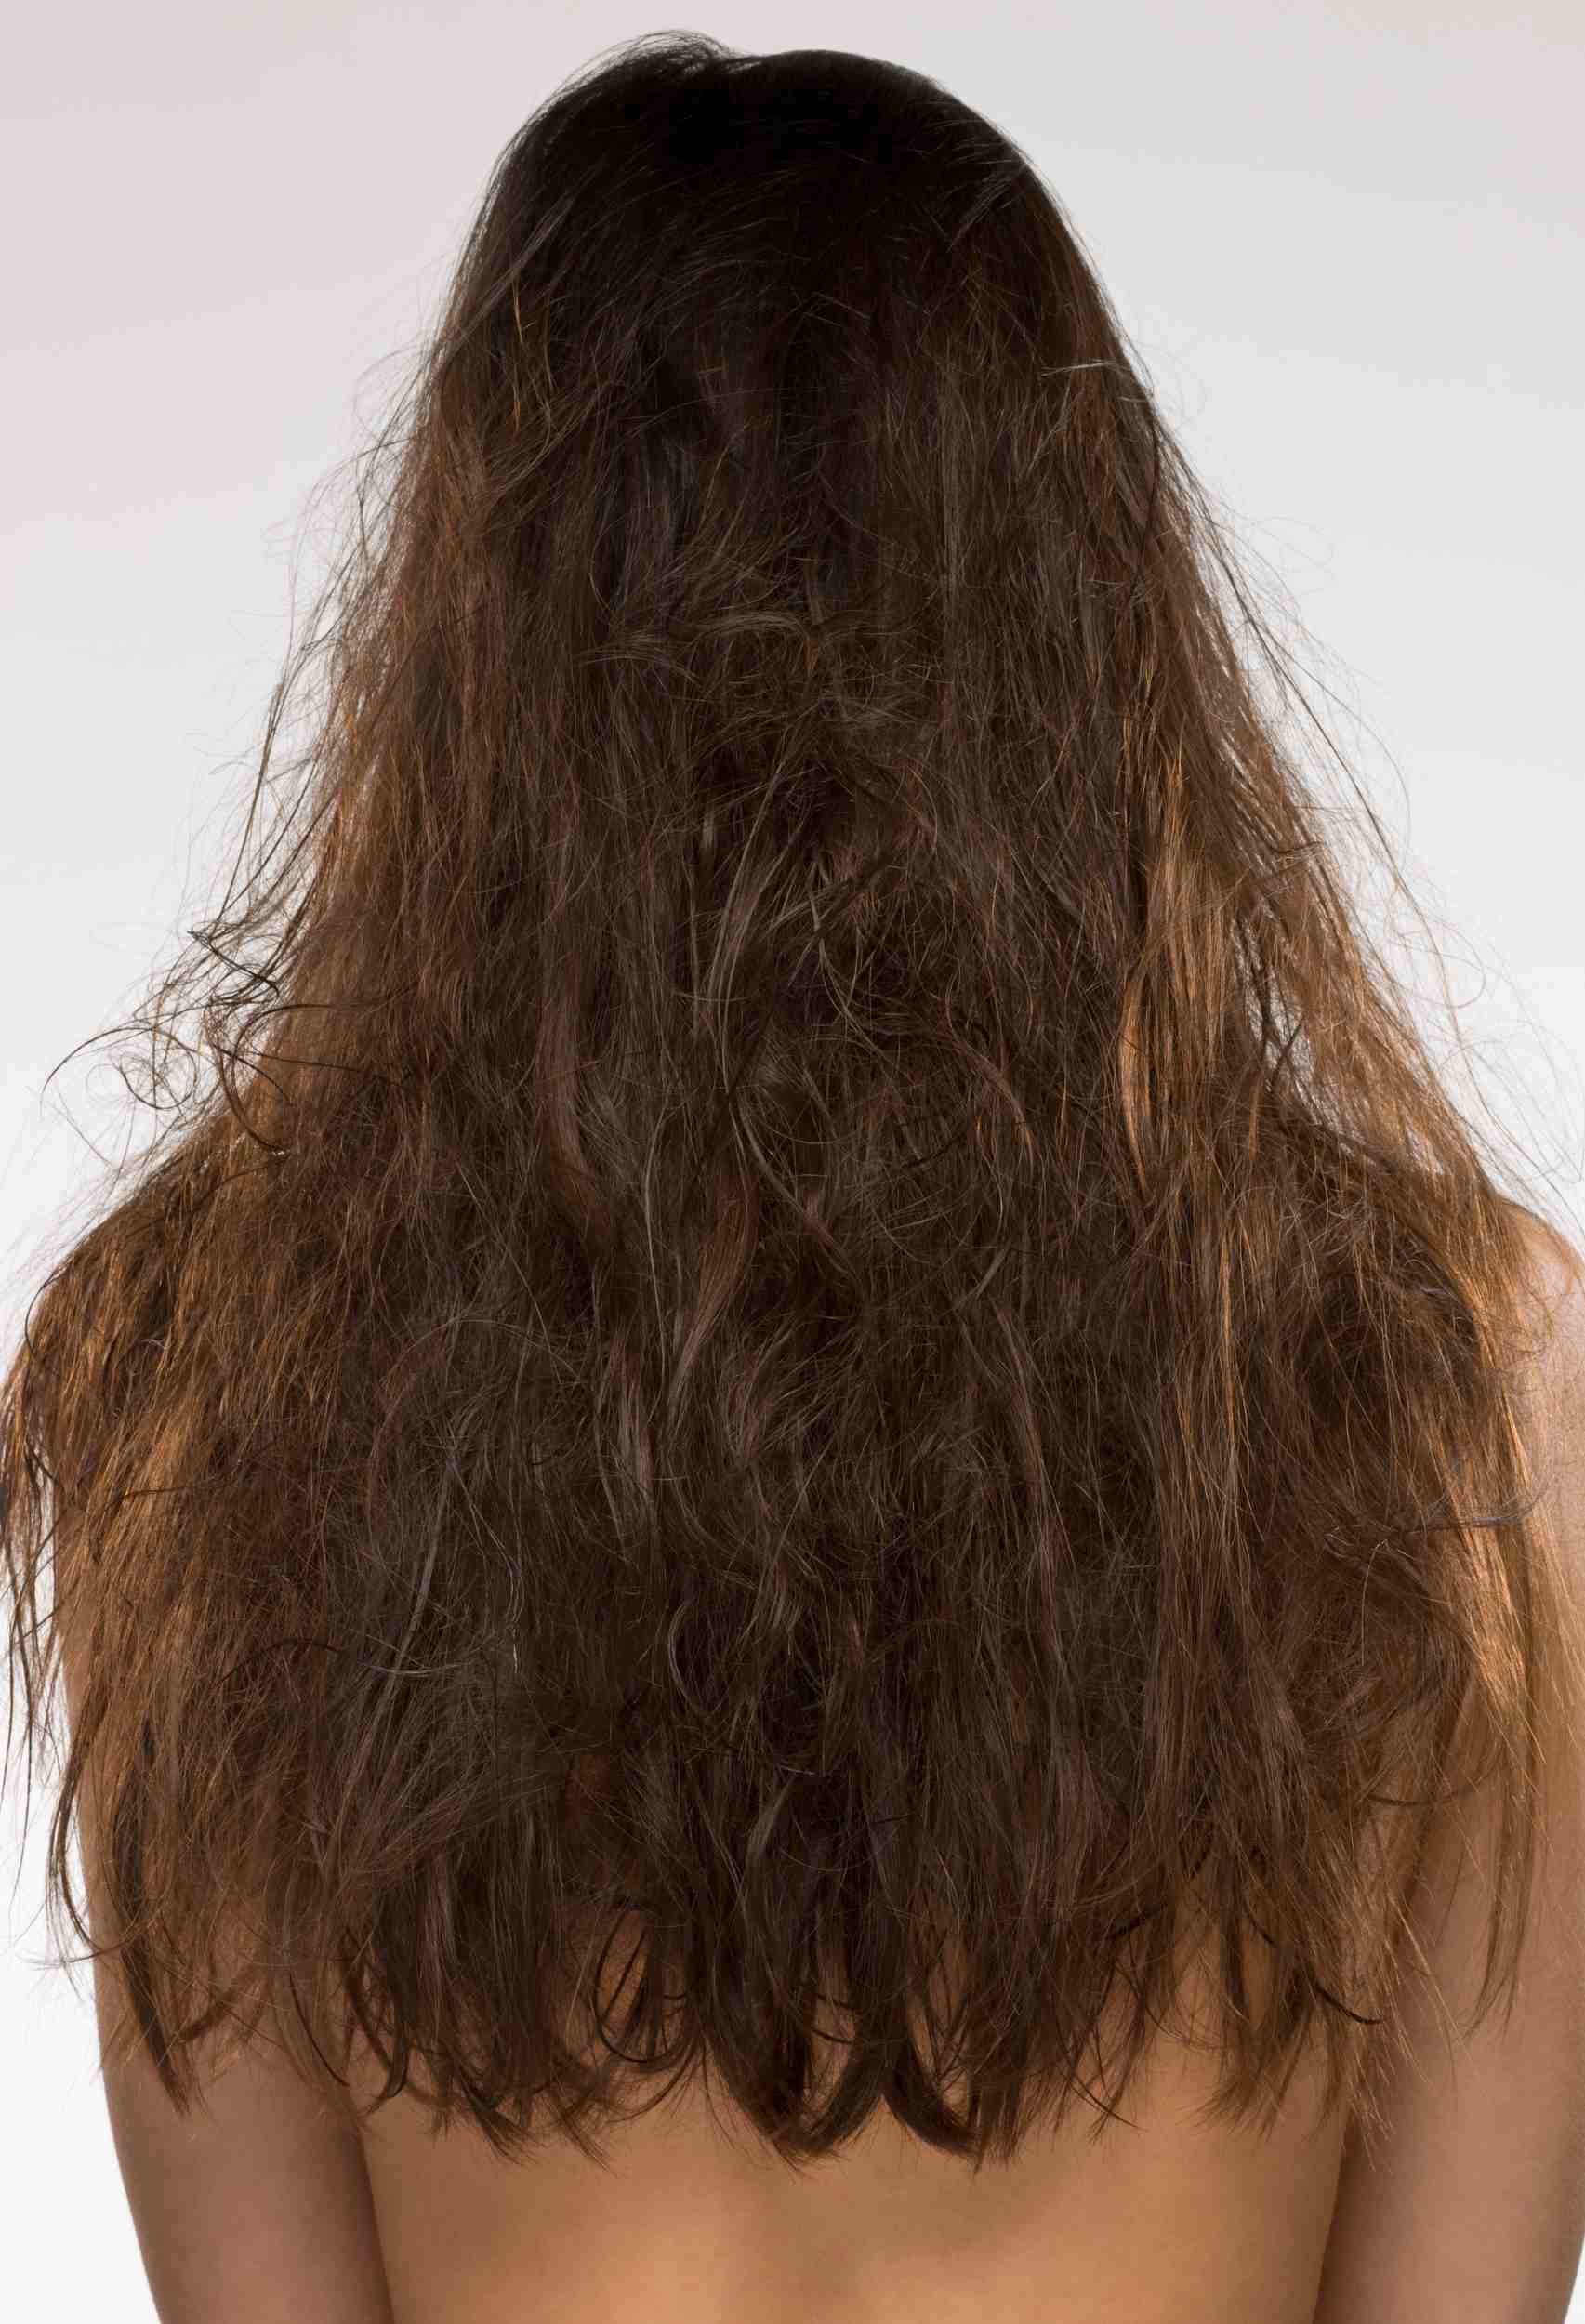 How to Banish Frizzy Hair: 5 Simple Solutions That Work